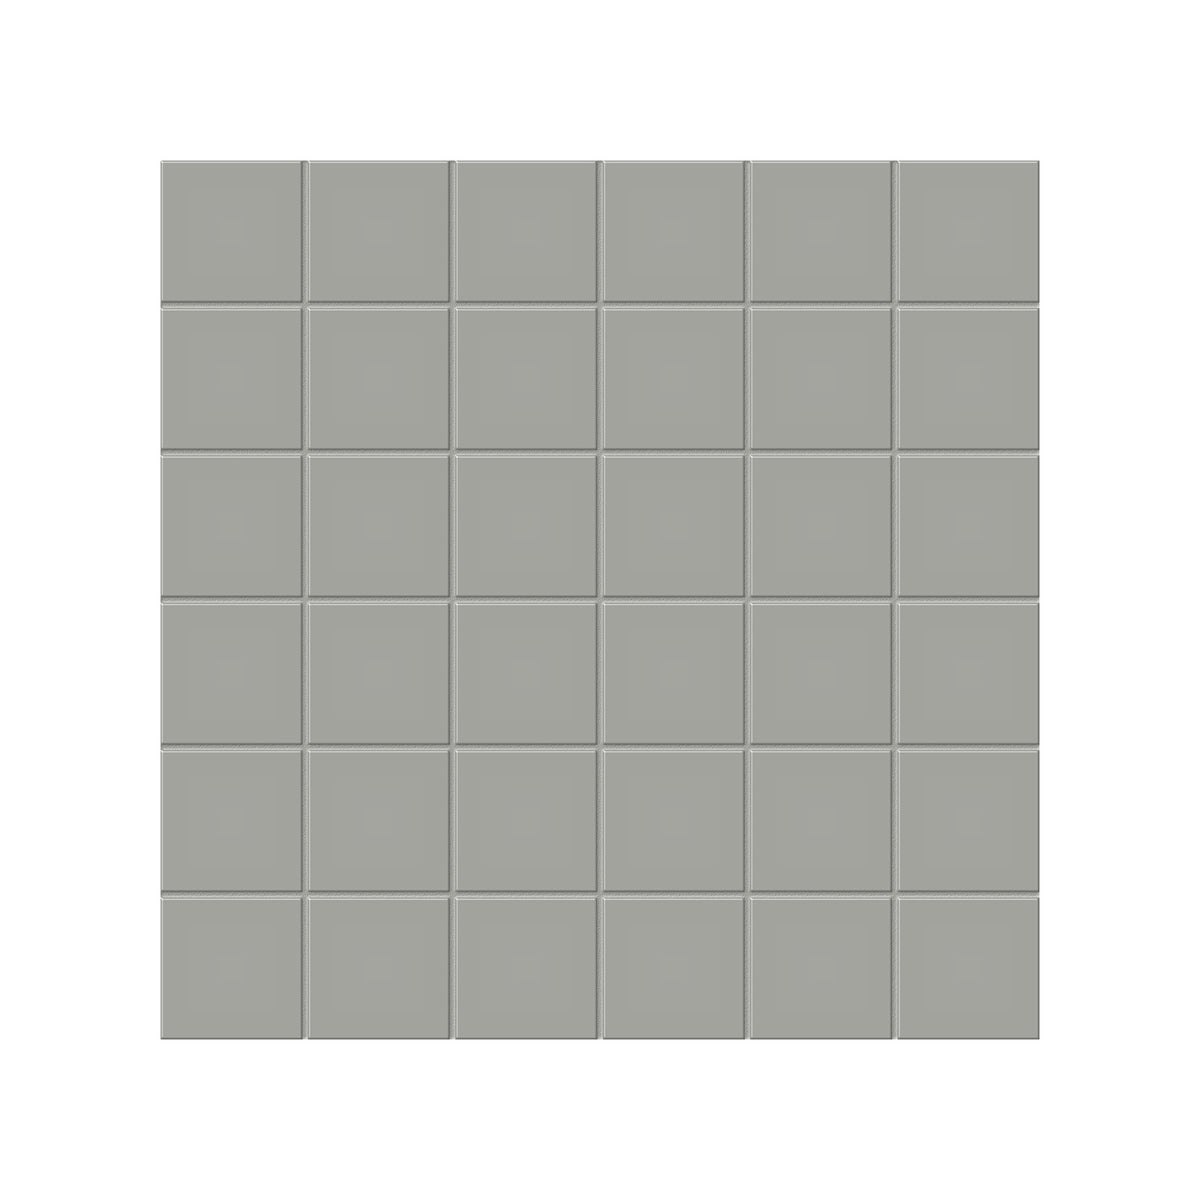 Anatolia - Soho Porcelain 2 in. x 2 in. Glazed Mosaic - Cement Chic Matte